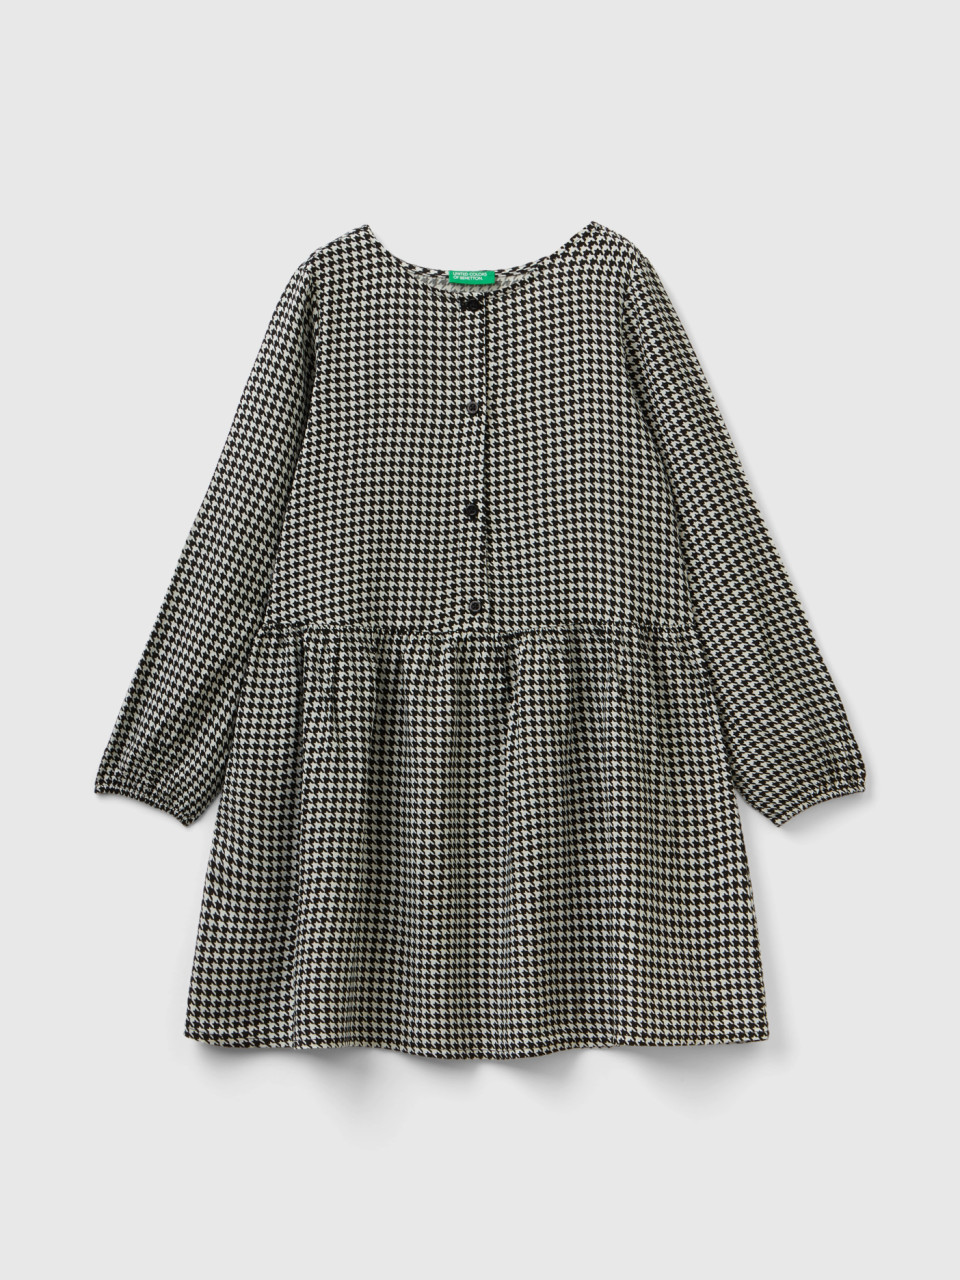 Benetton, Houndstooth Dress In Sustainable Viscose, Black, Kids